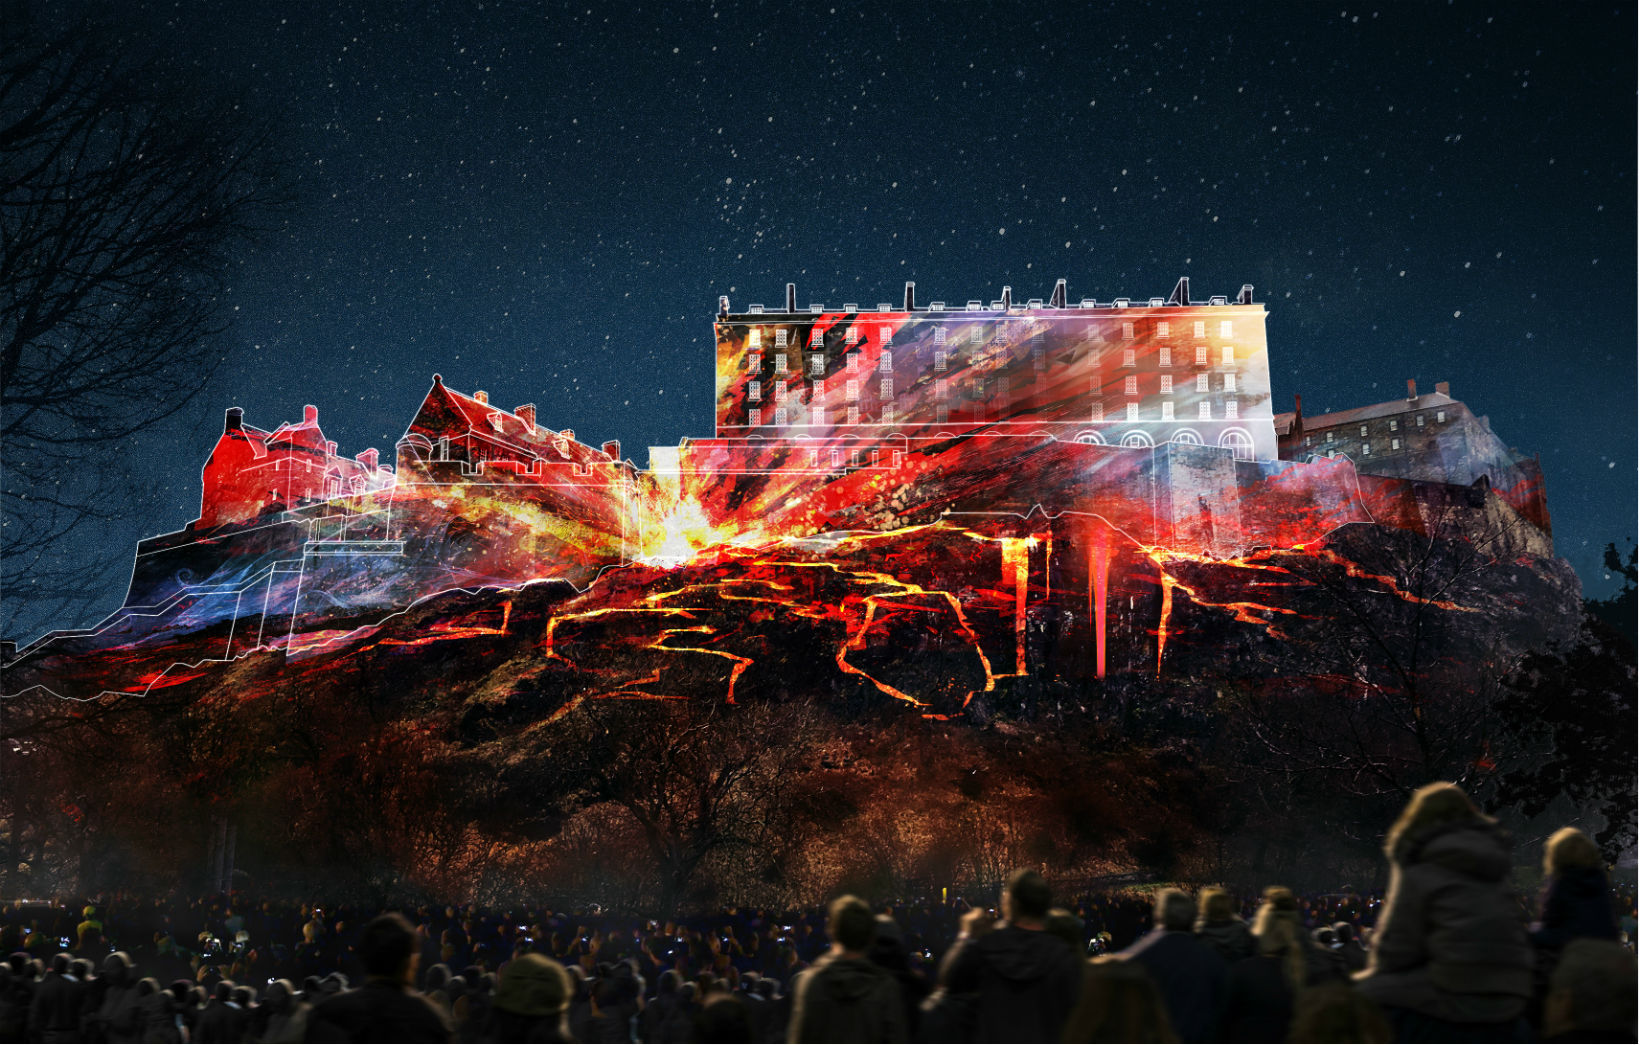 An artist's impression of Edinburgh Castle which will provide the backdrop for a spectacular show to mark the opening of this year's festival.